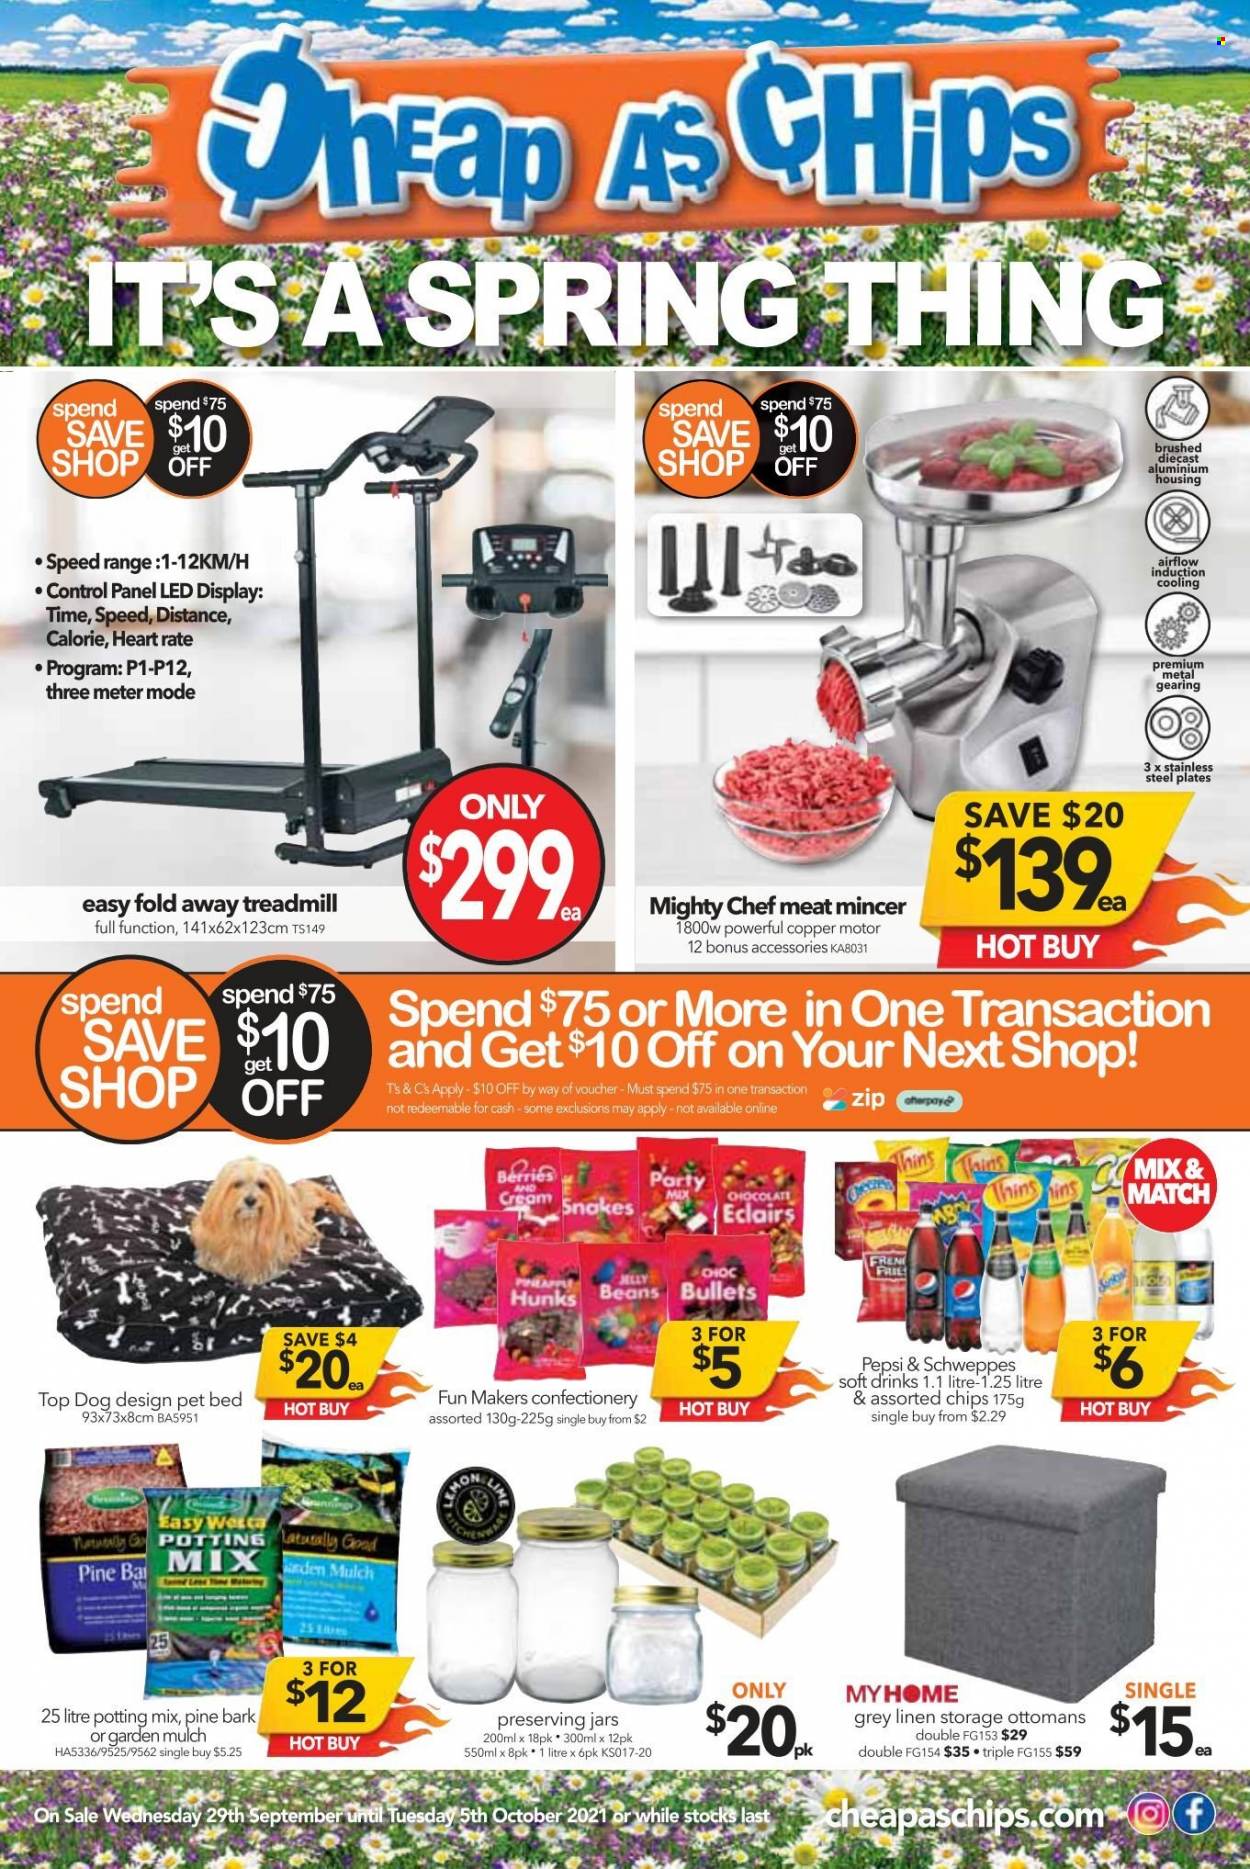 thumbnail - Cheap as Chips Catalogue - 29 Sep 2021 - 5 Oct 2021 - Sales products - Thins, Schweppes, Pepsi, soft drink, plate, preserving jars, jar, linens, pet bed, potting mix, garden mulch. Page 1.